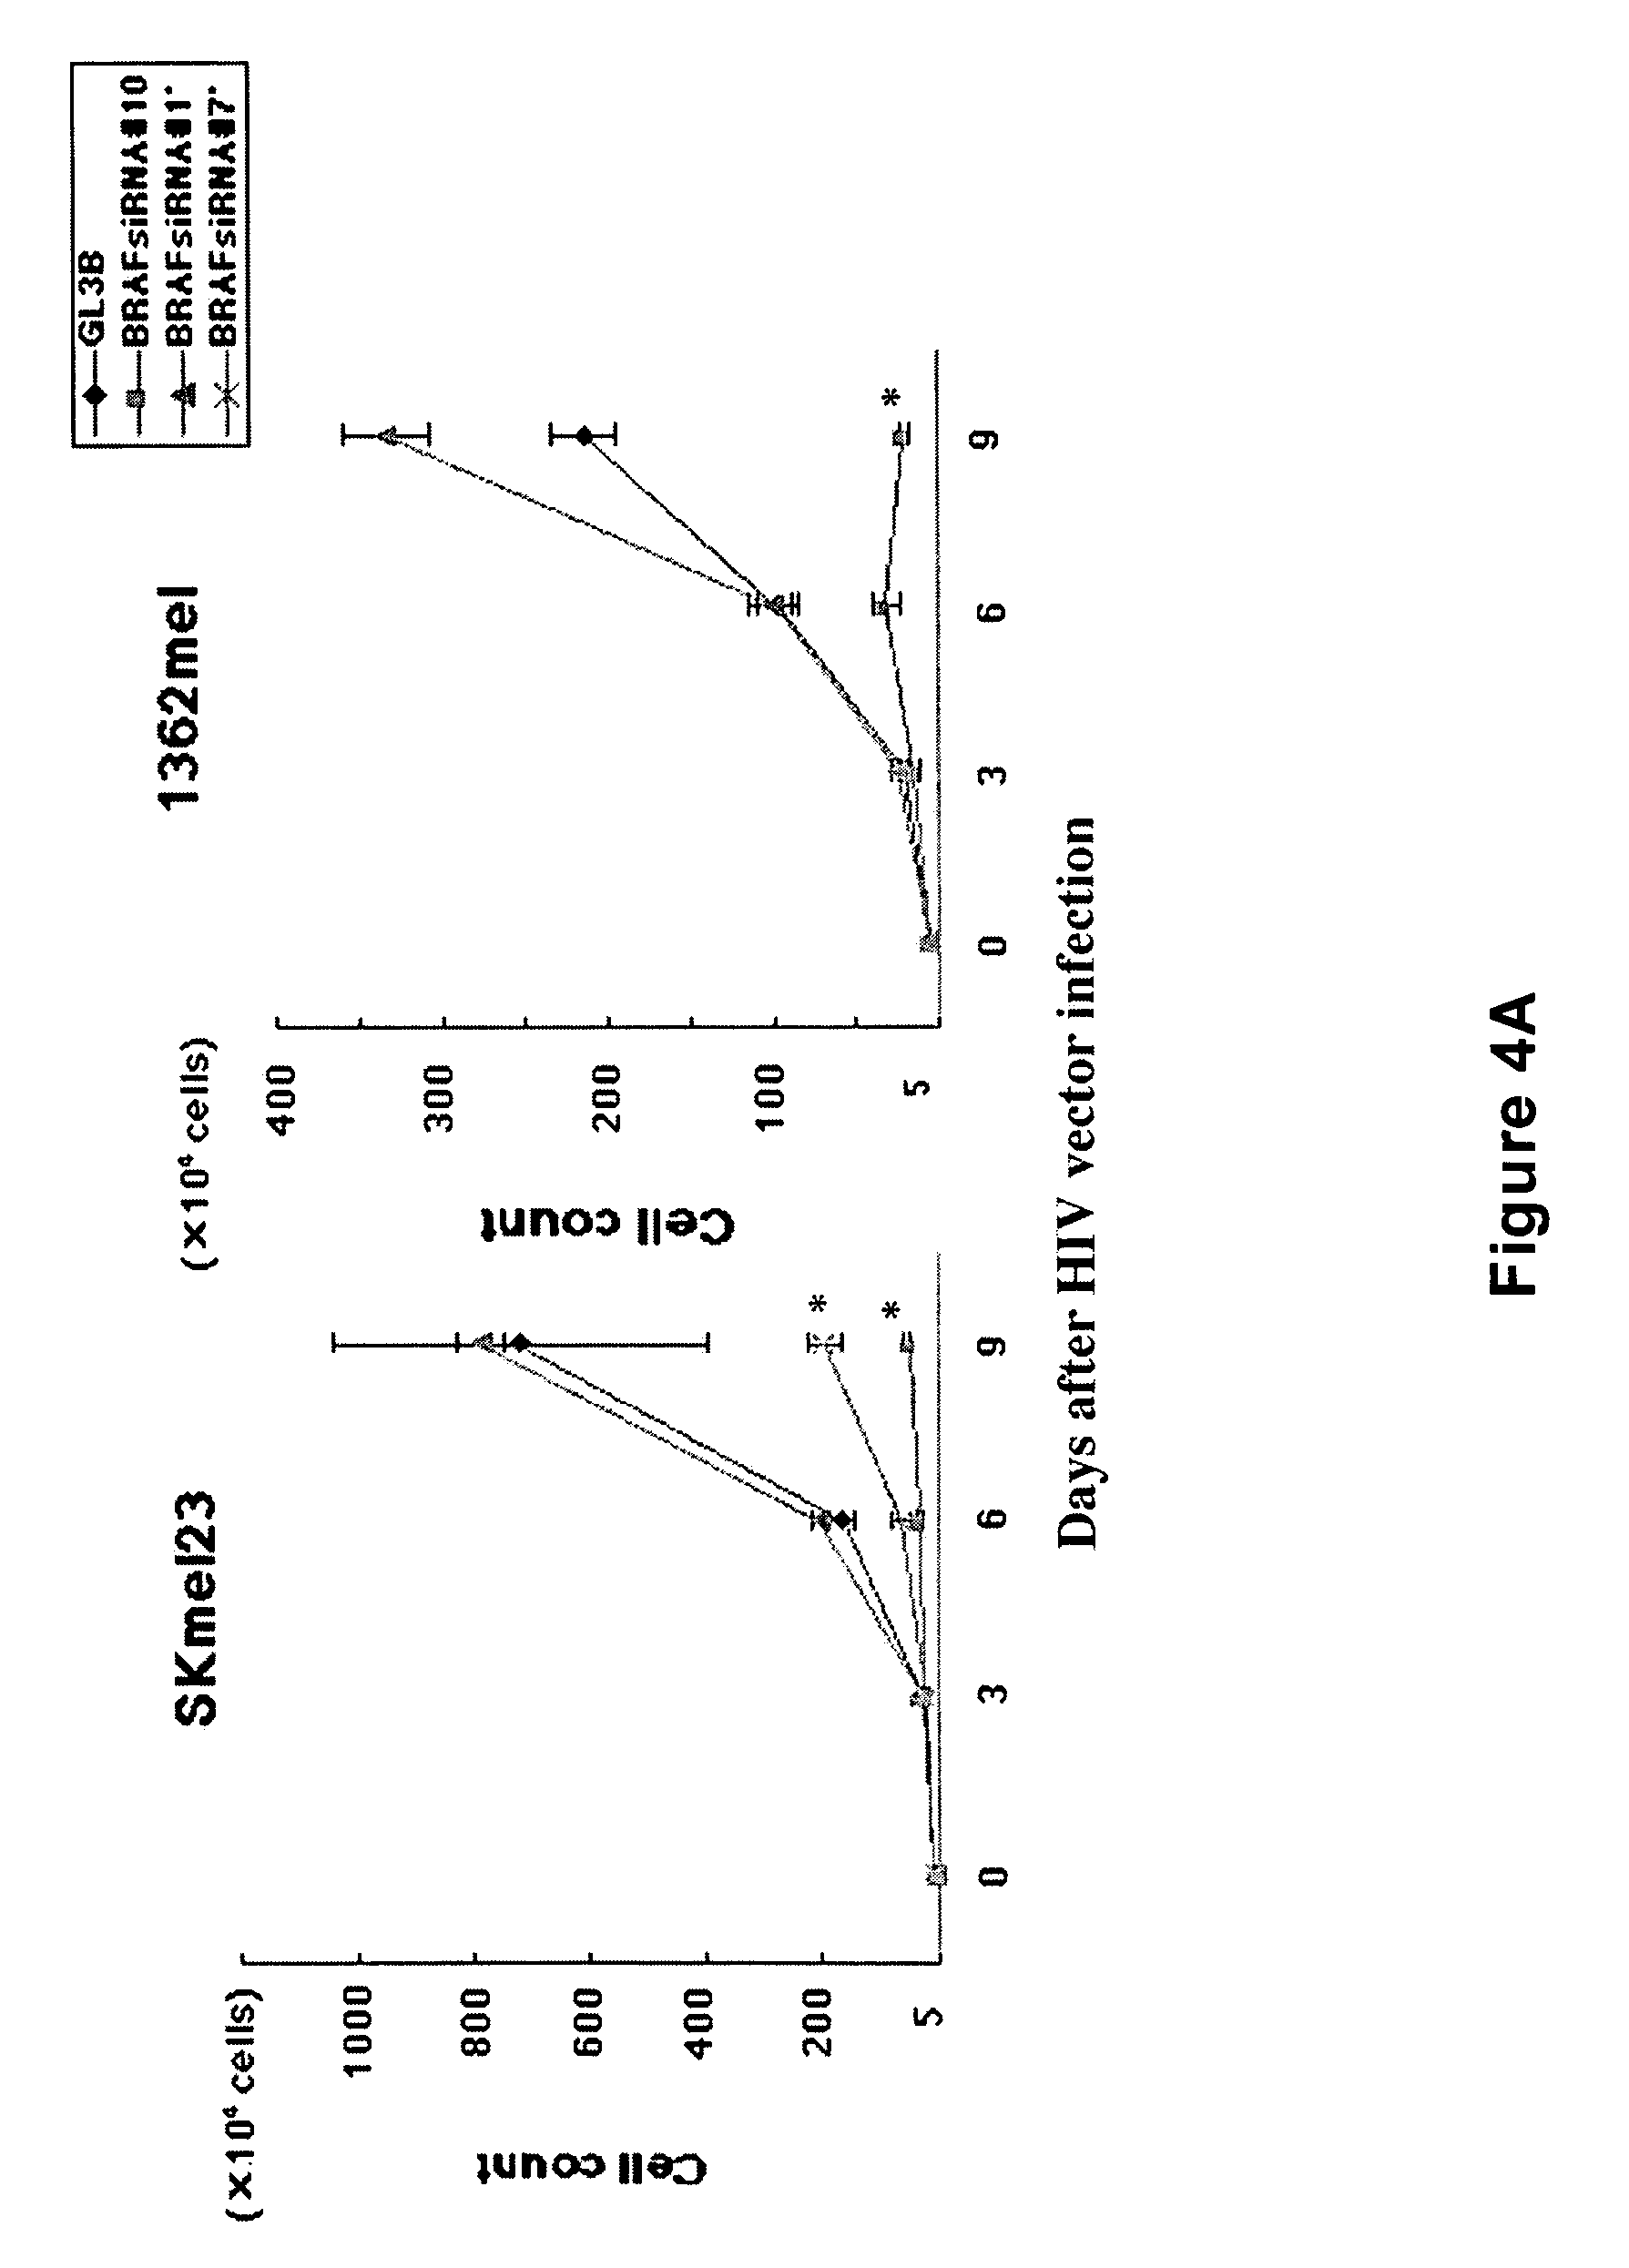 Treatment of cancer by inhibiting BRAF expression